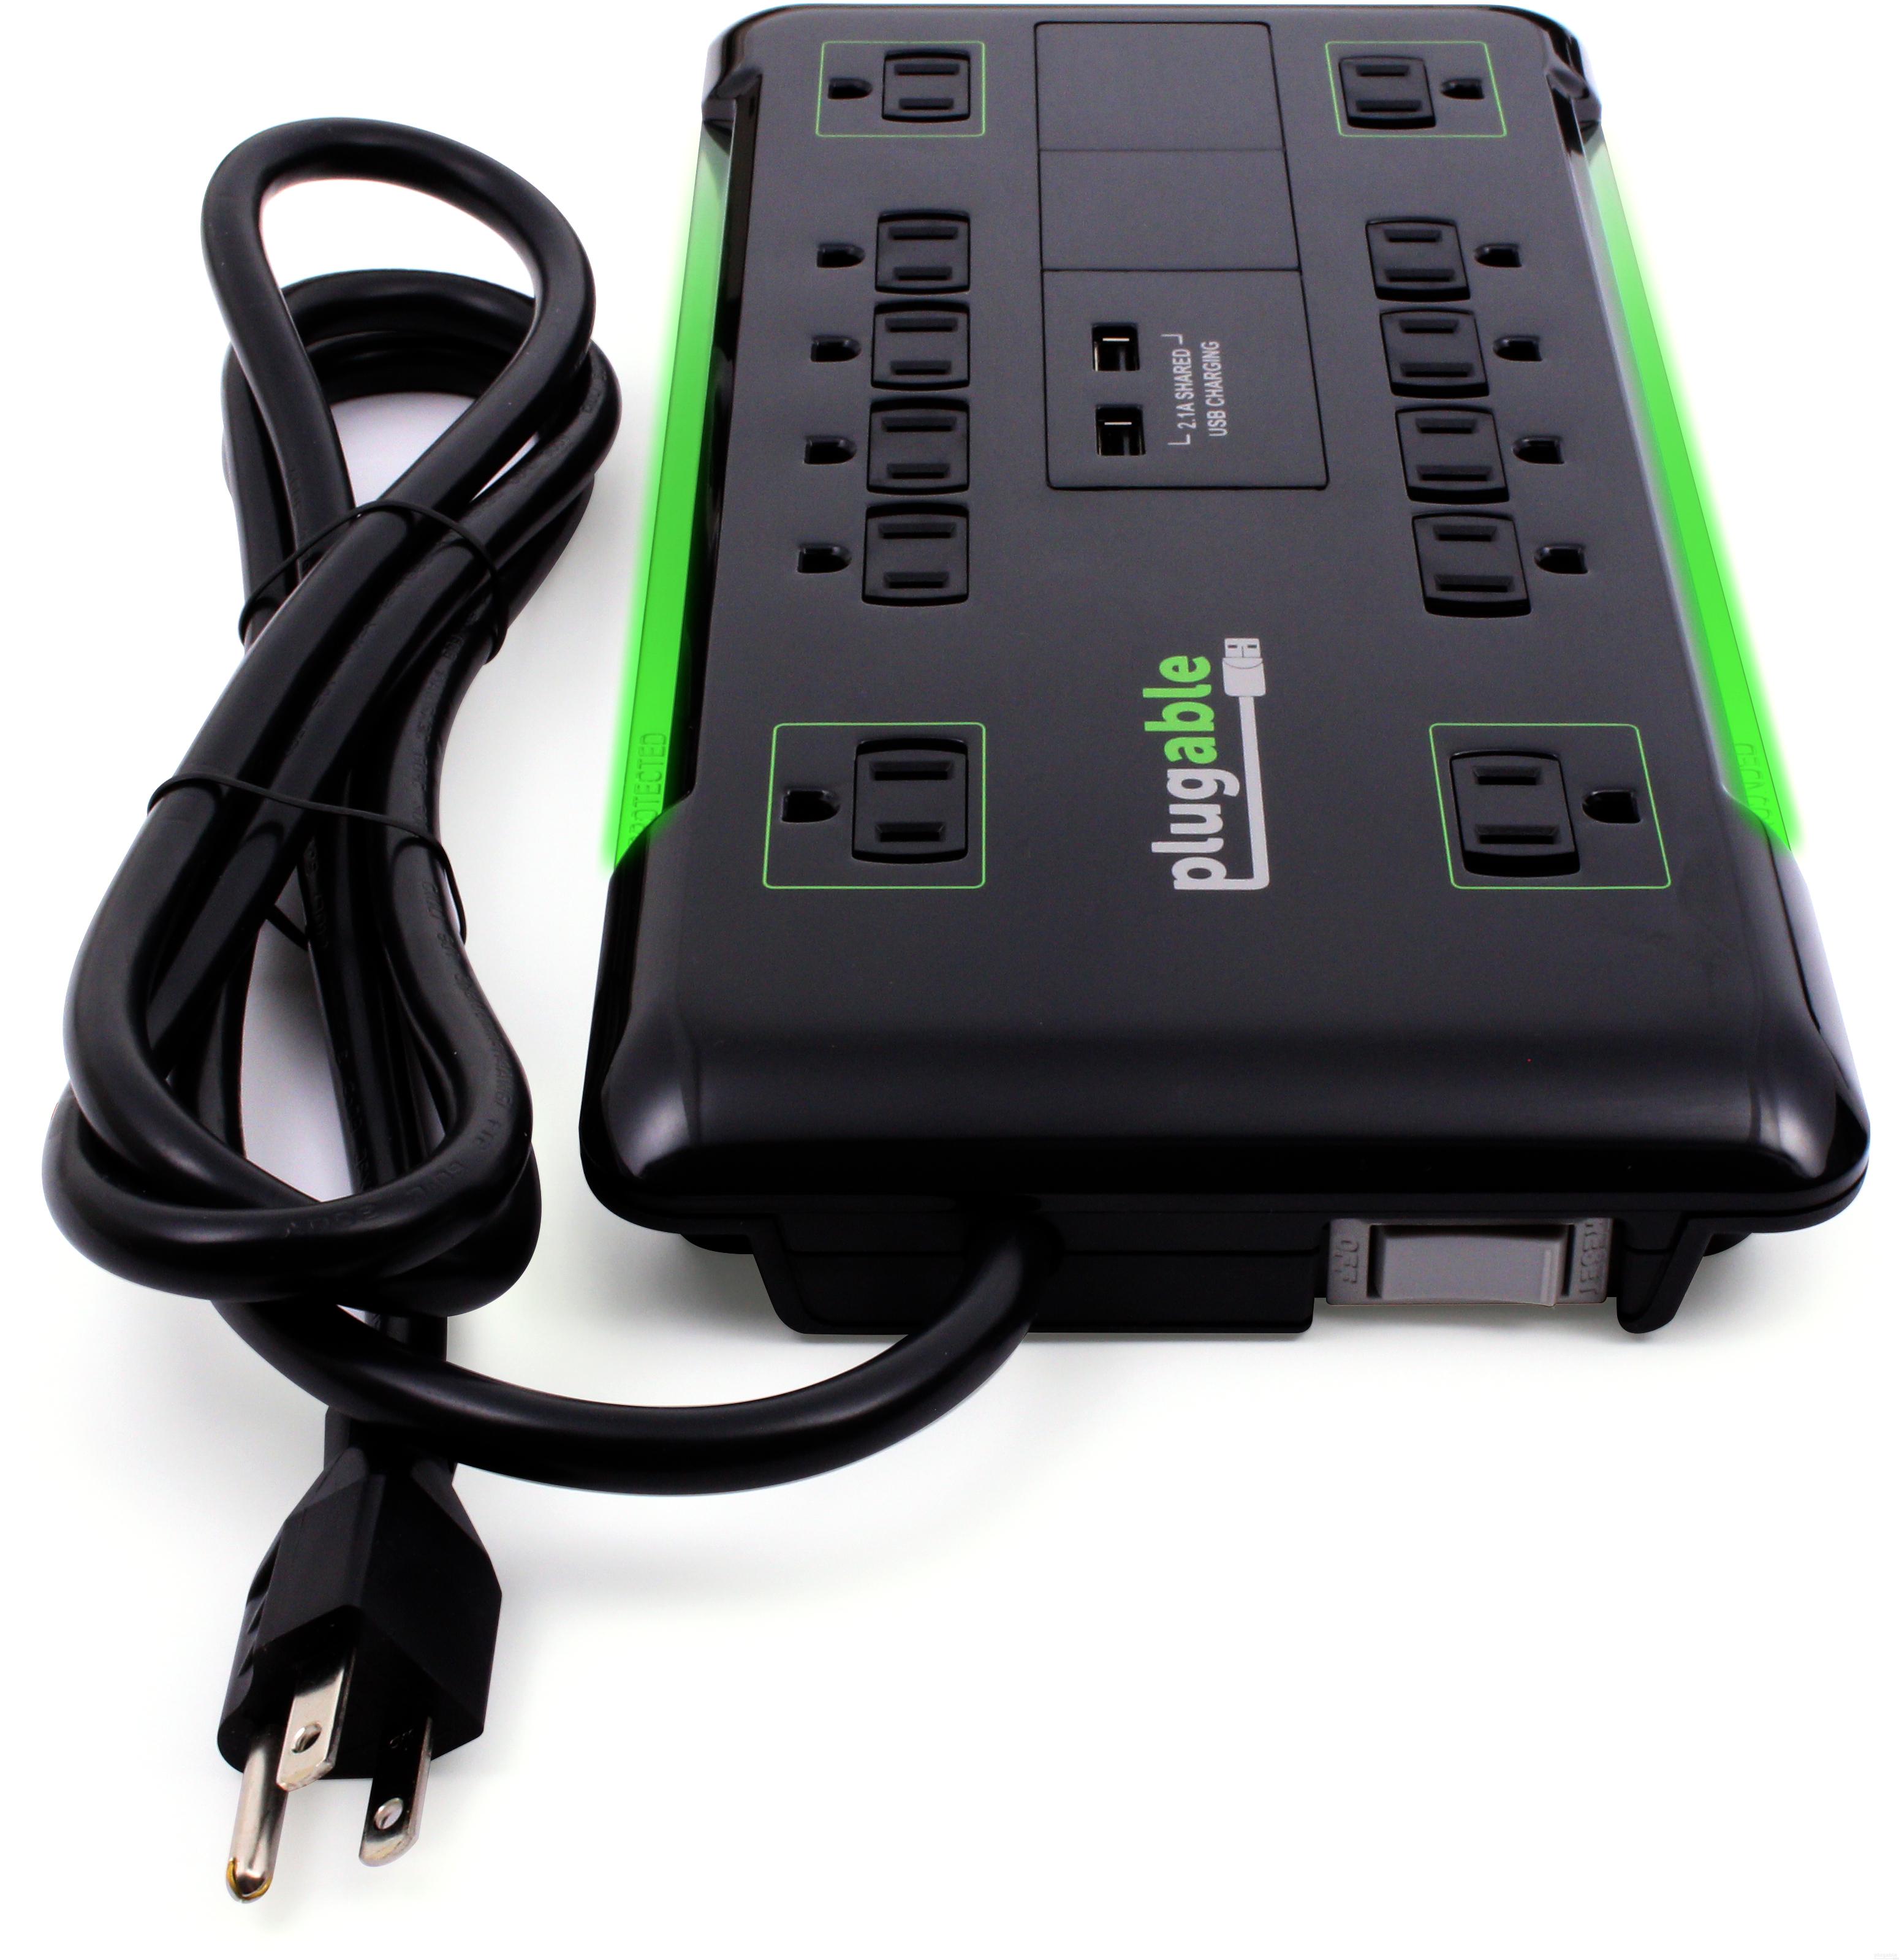 Plugable Surge Protector Power Strip with USB and 12 AC Outlets, Built-in 10.5W 2-Port USB Charger for Android, Apple iOS, and Windows Mobile Devices, 6 Foot Extension Cord - image 5 of 5